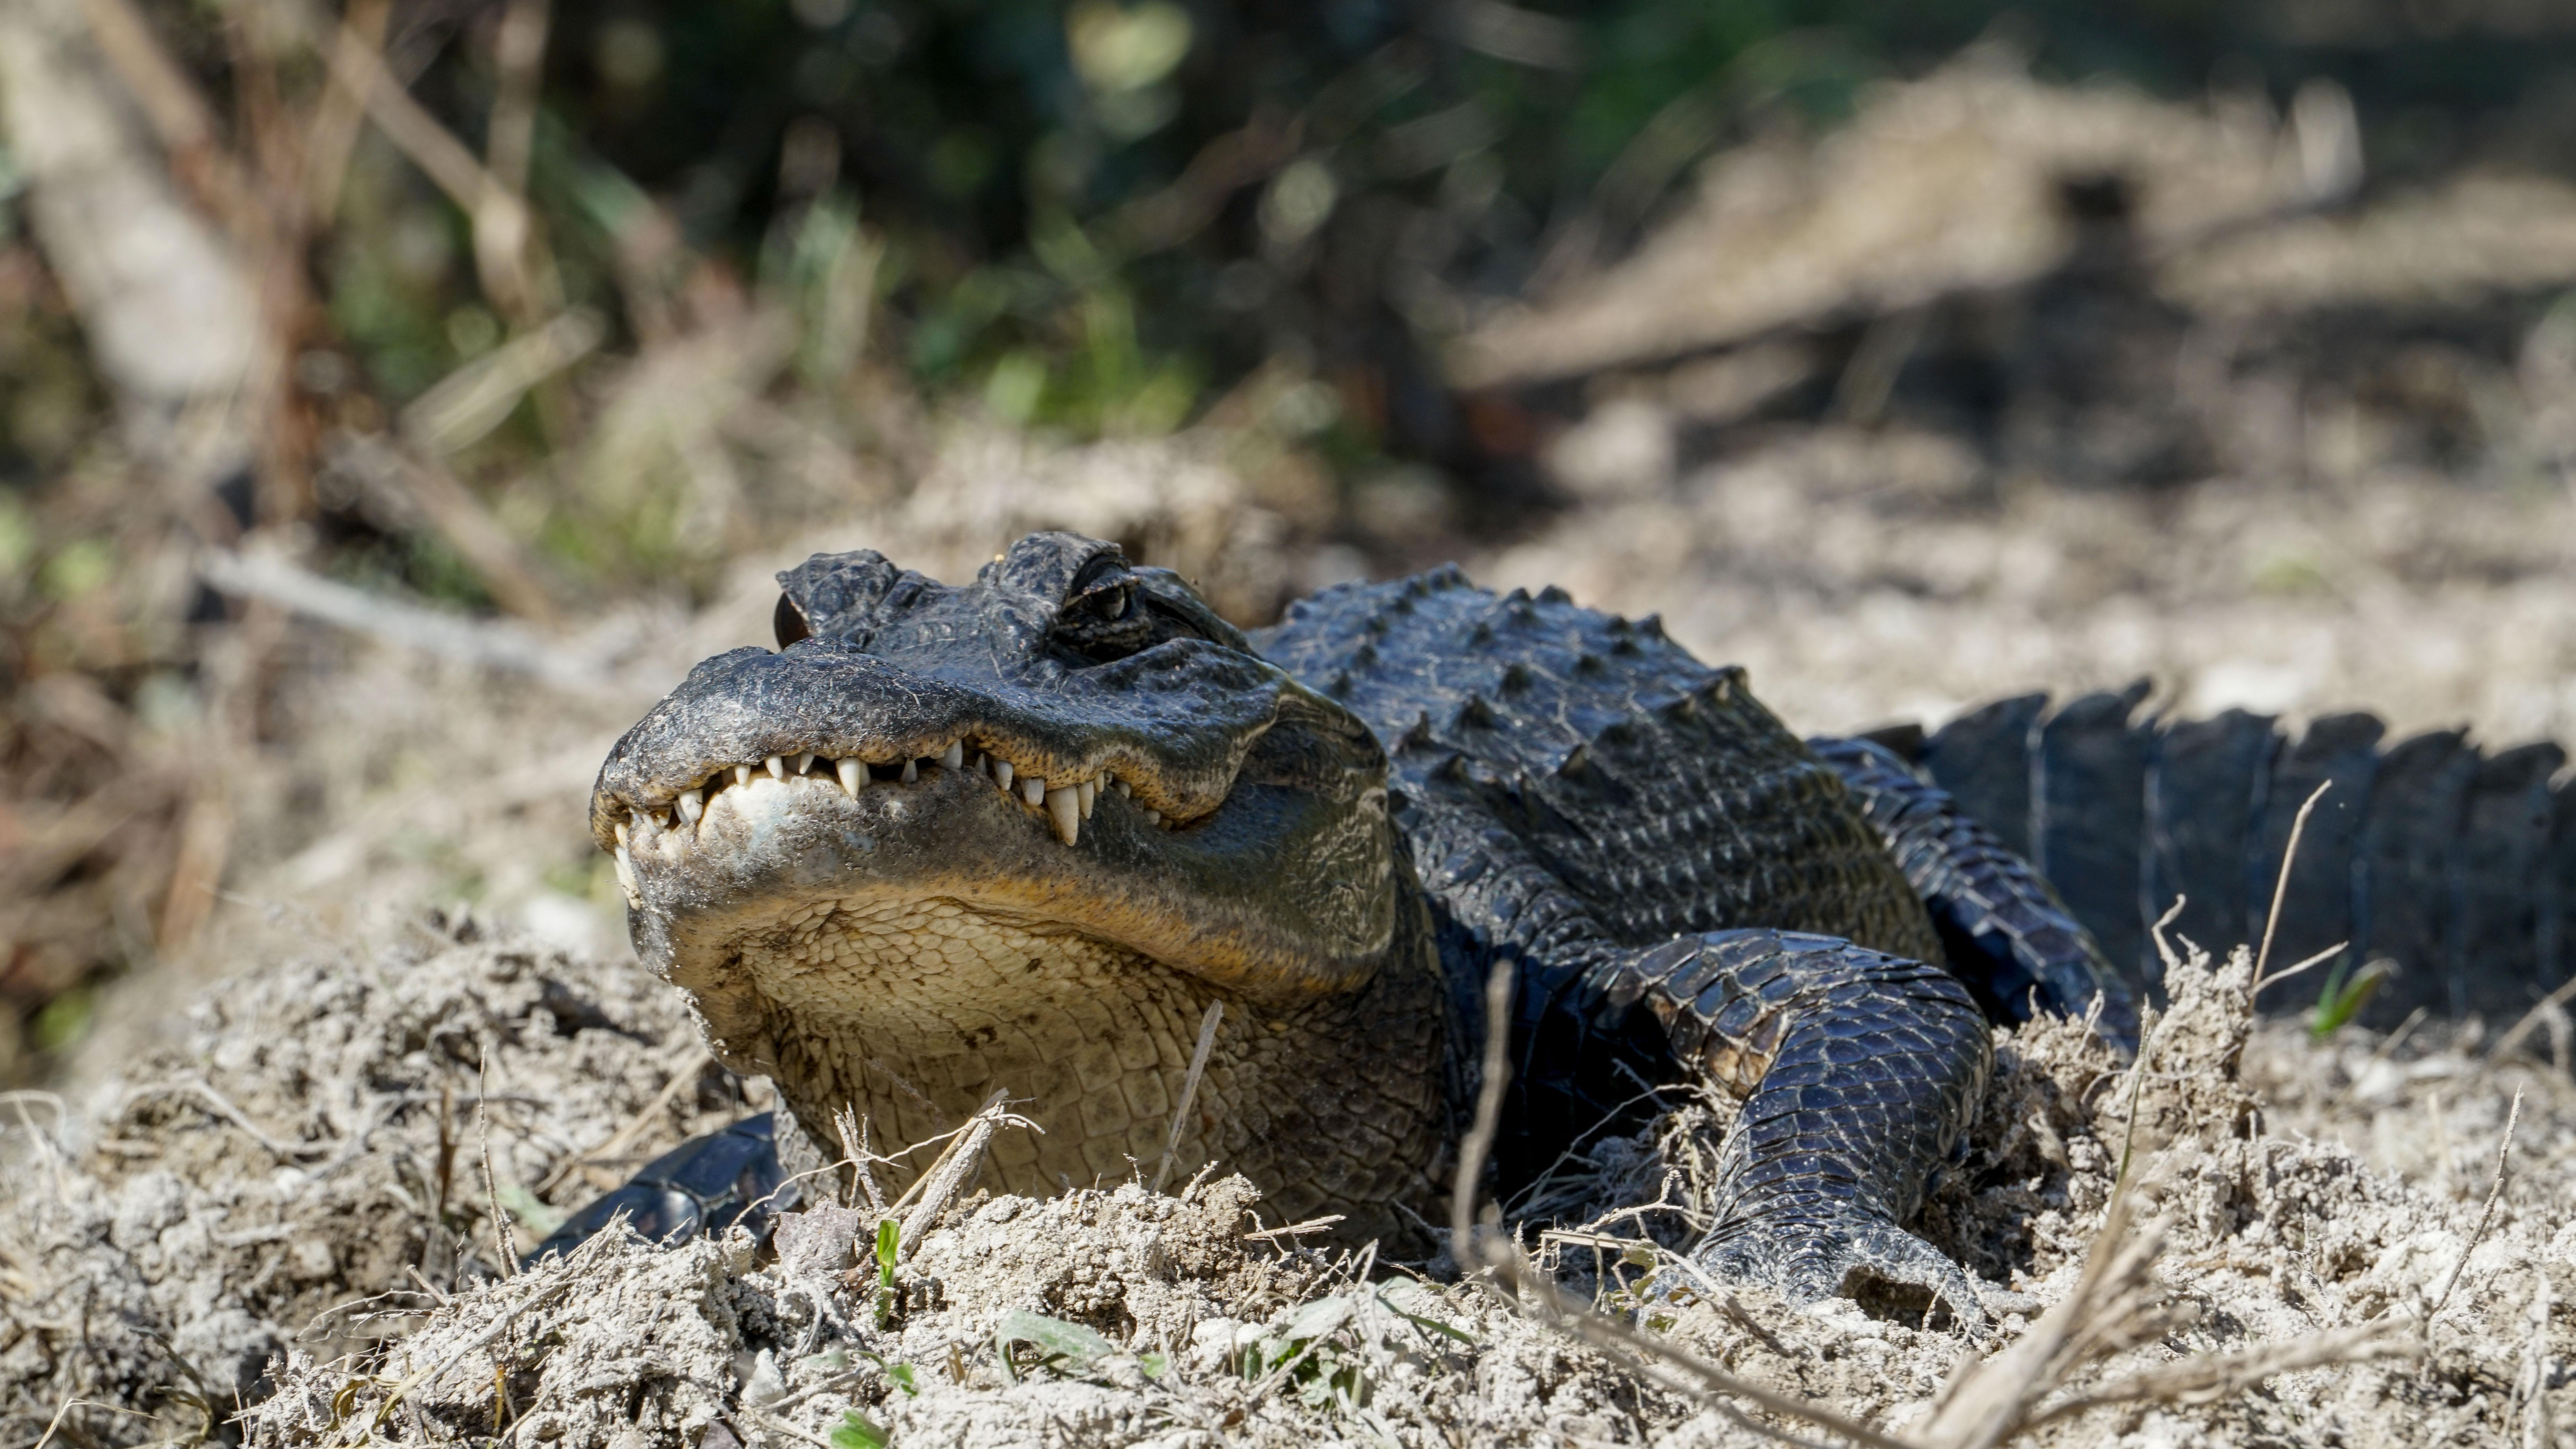 A small alligator basking on top of dry vegetation.